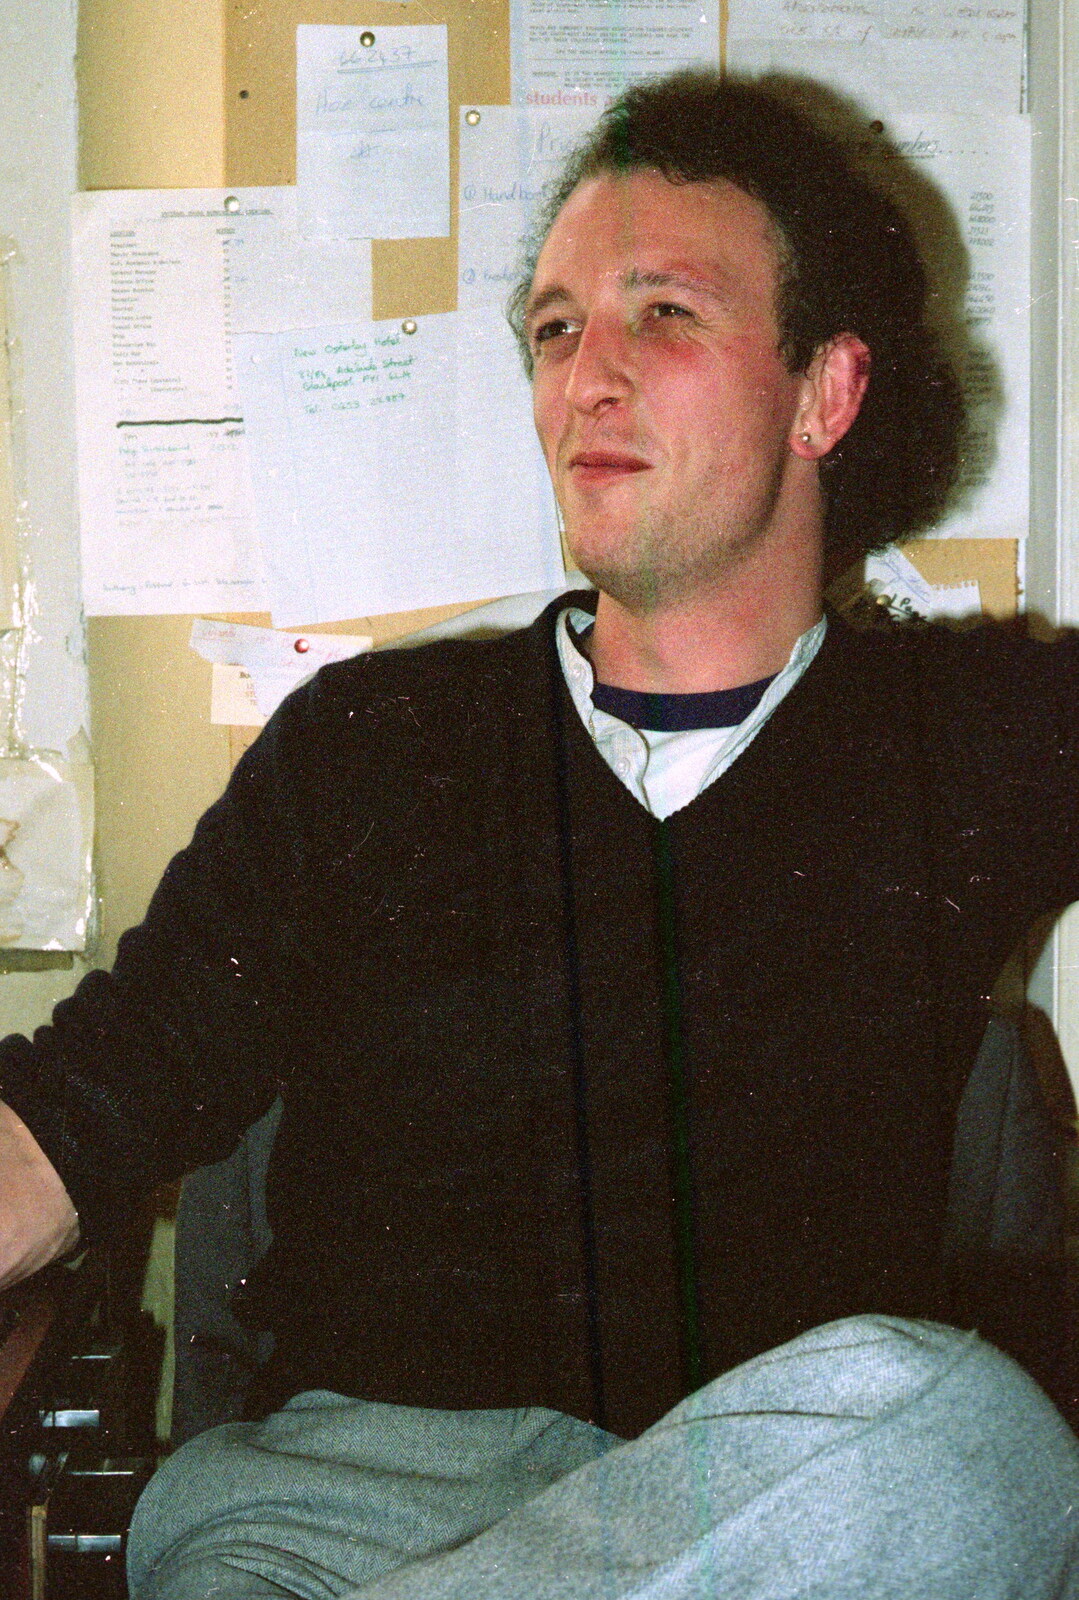 Hanging out in the Fly office from Uni: The Fly Christmas Party and BABS Panto, Plymouth Polytechnic, Devon - December 11th 1985